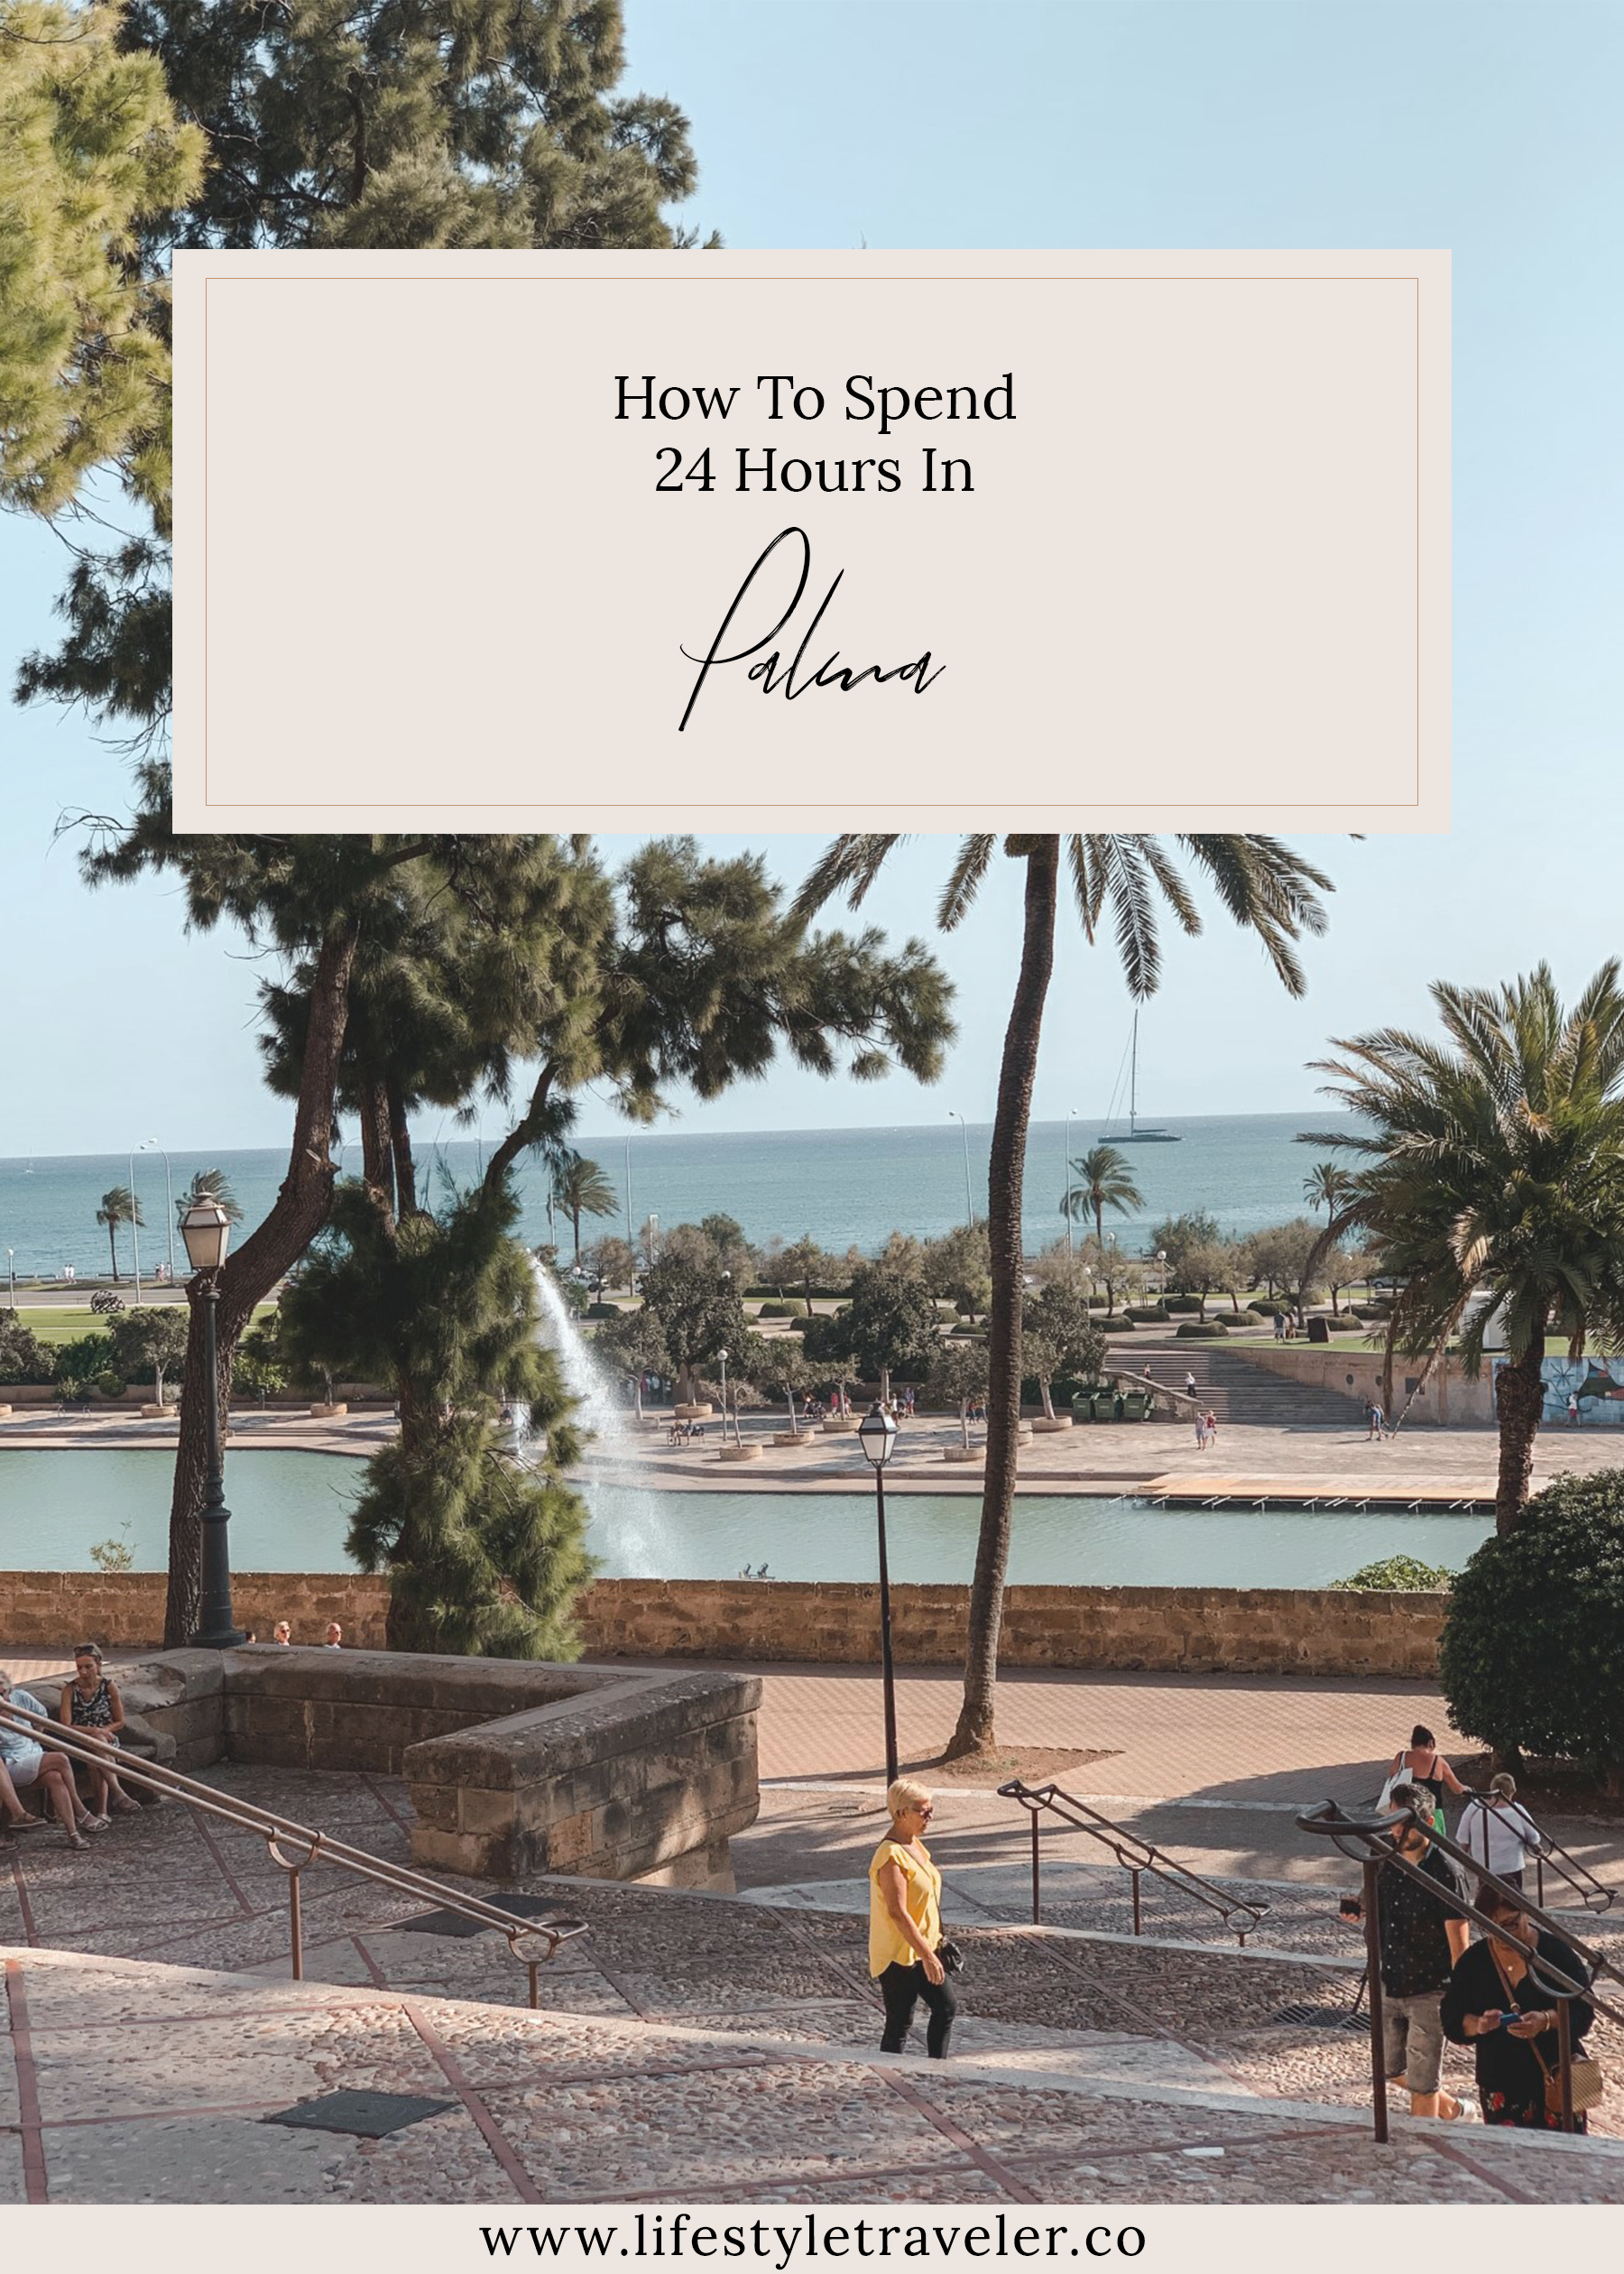 How To Spend 24 Hours In Palma | lifestyletraveler.co | IG: @lifestyletraveler.co